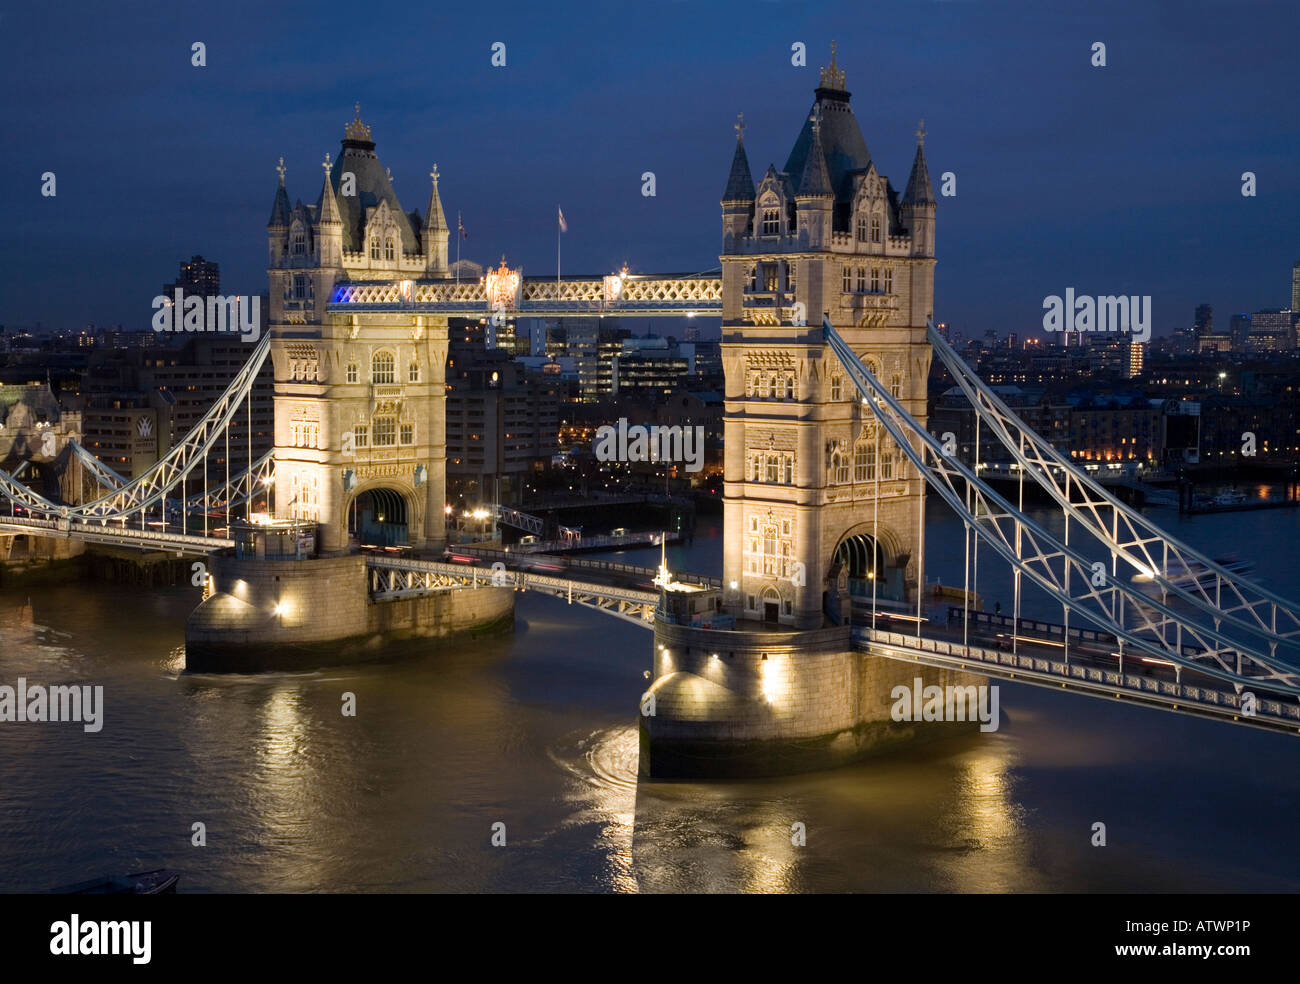 Evening and elevated night photograph view of Tower Bridge, which spans the River Thames between Southwark and the City of London, UK. Stock Photo